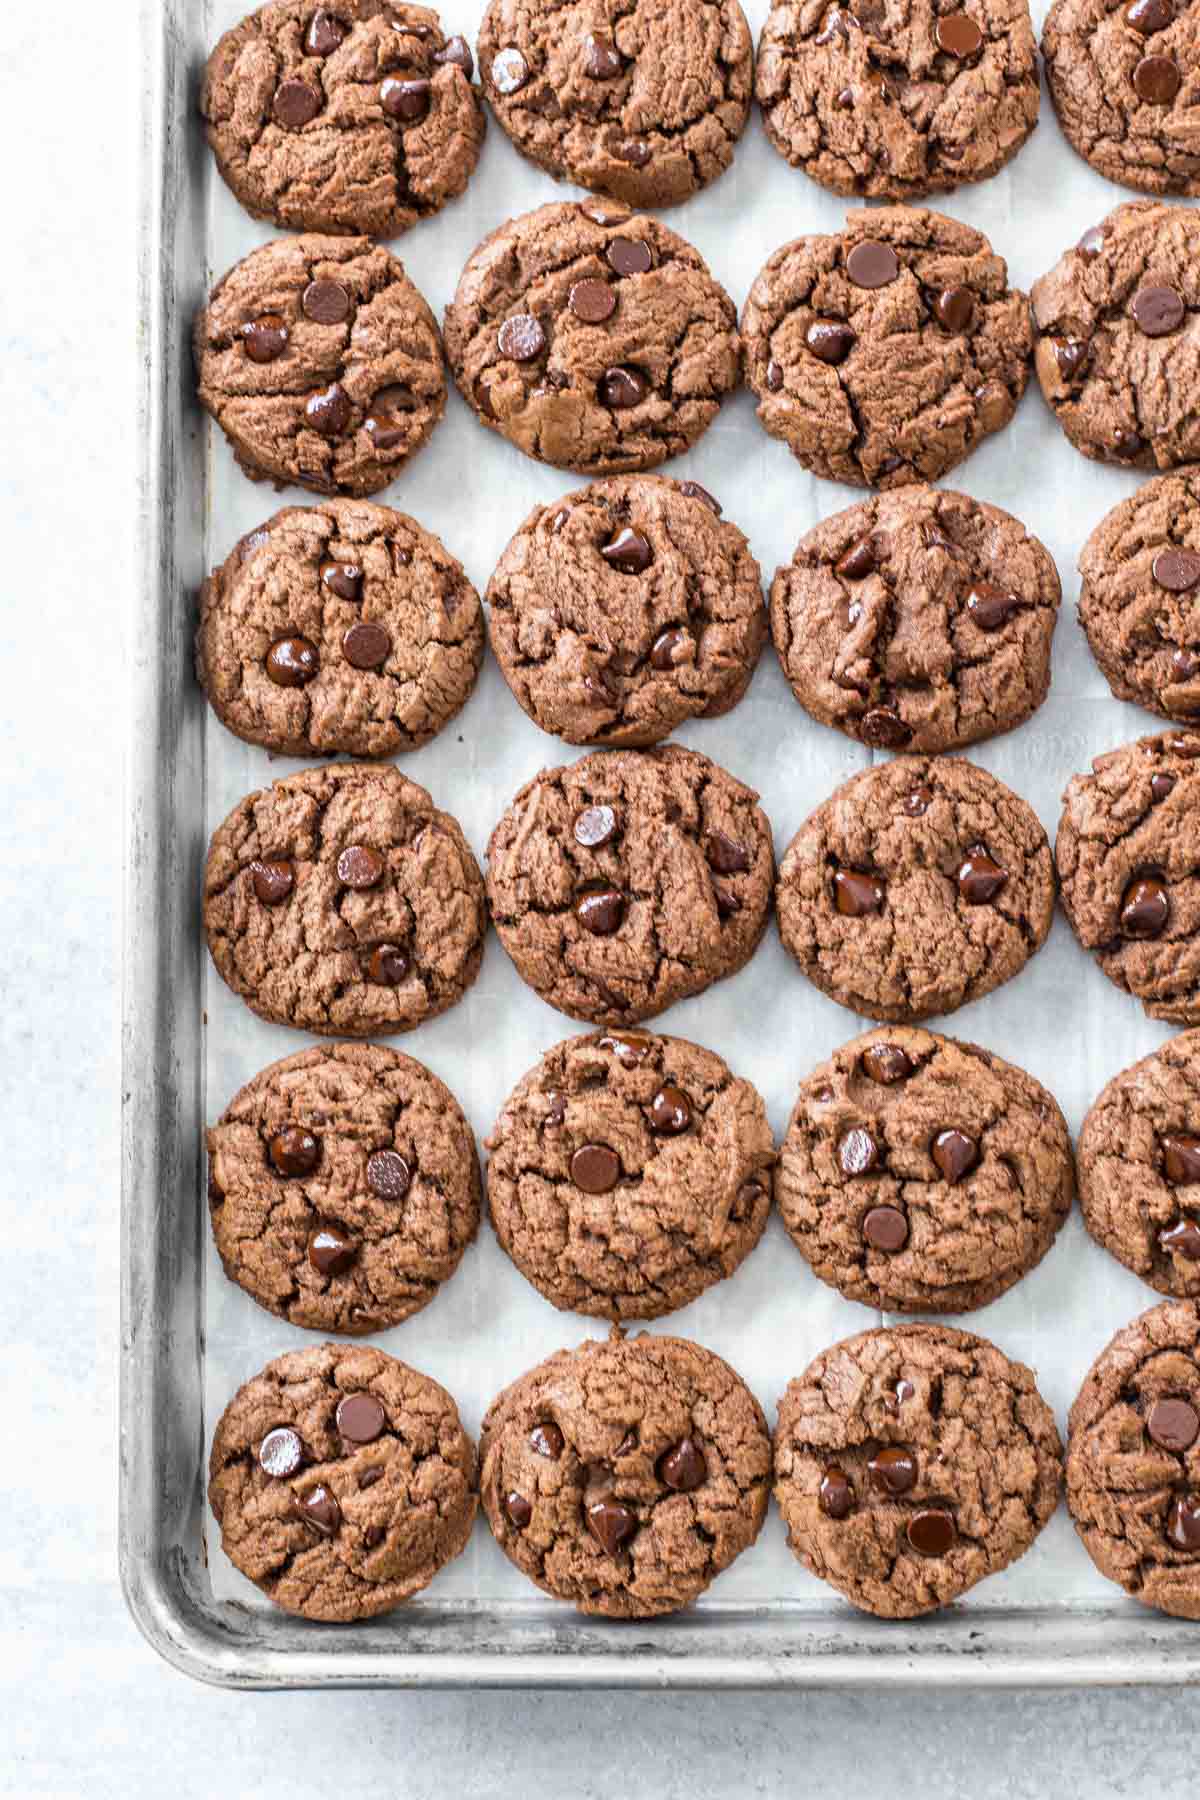 a sheet pan, lined with parchment paper, filled with chocolate chocolate chip cookies on a gray background